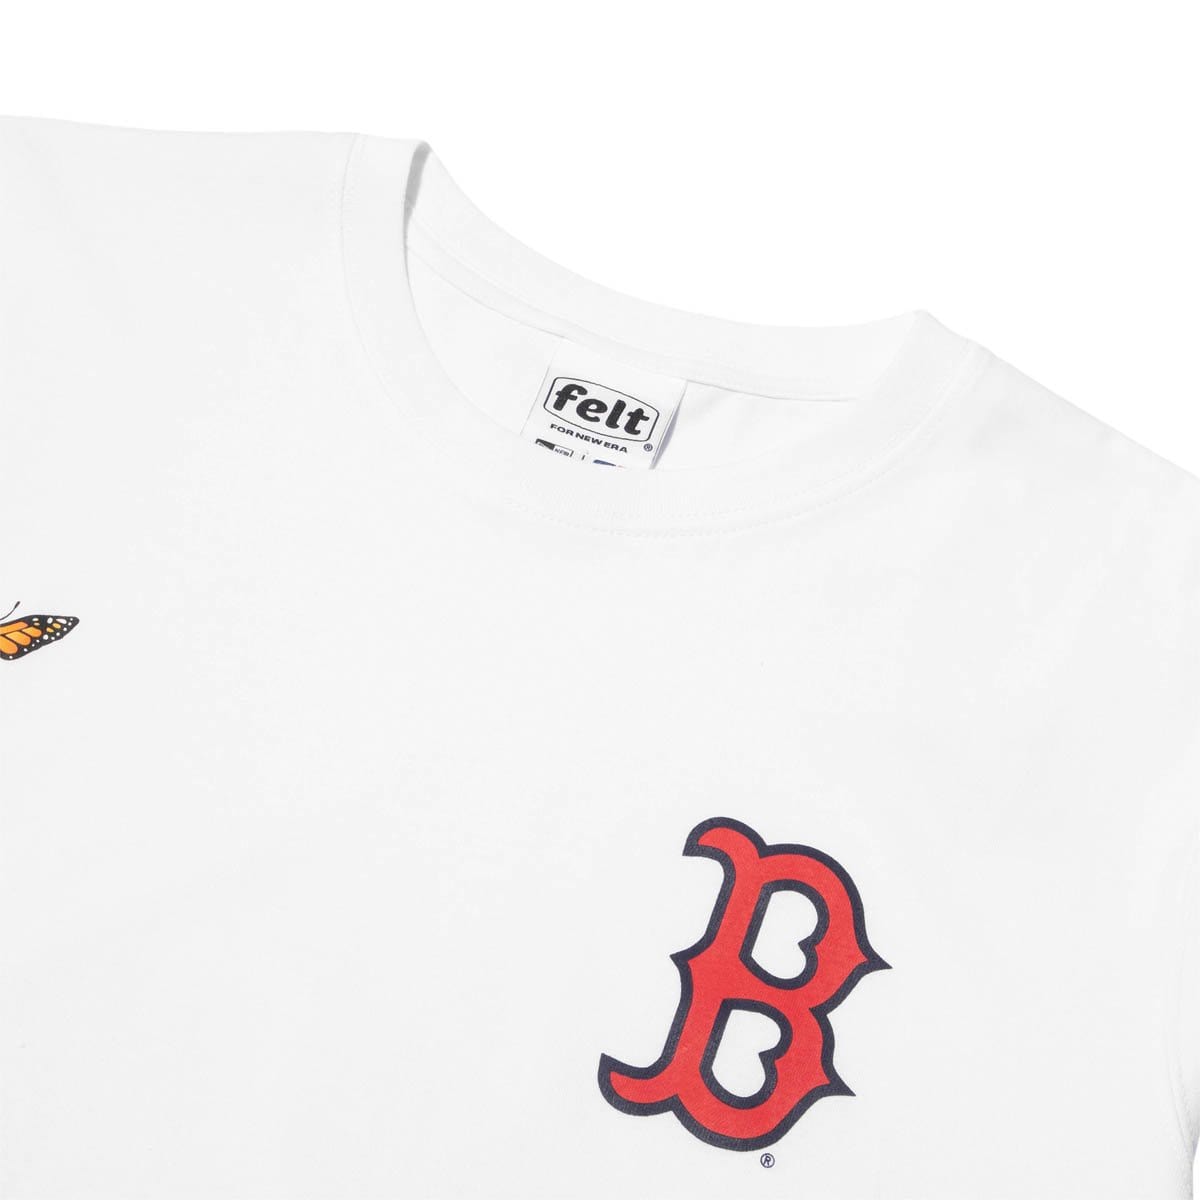 Just found a new 04 Red Sox Shirt – CrossRoads